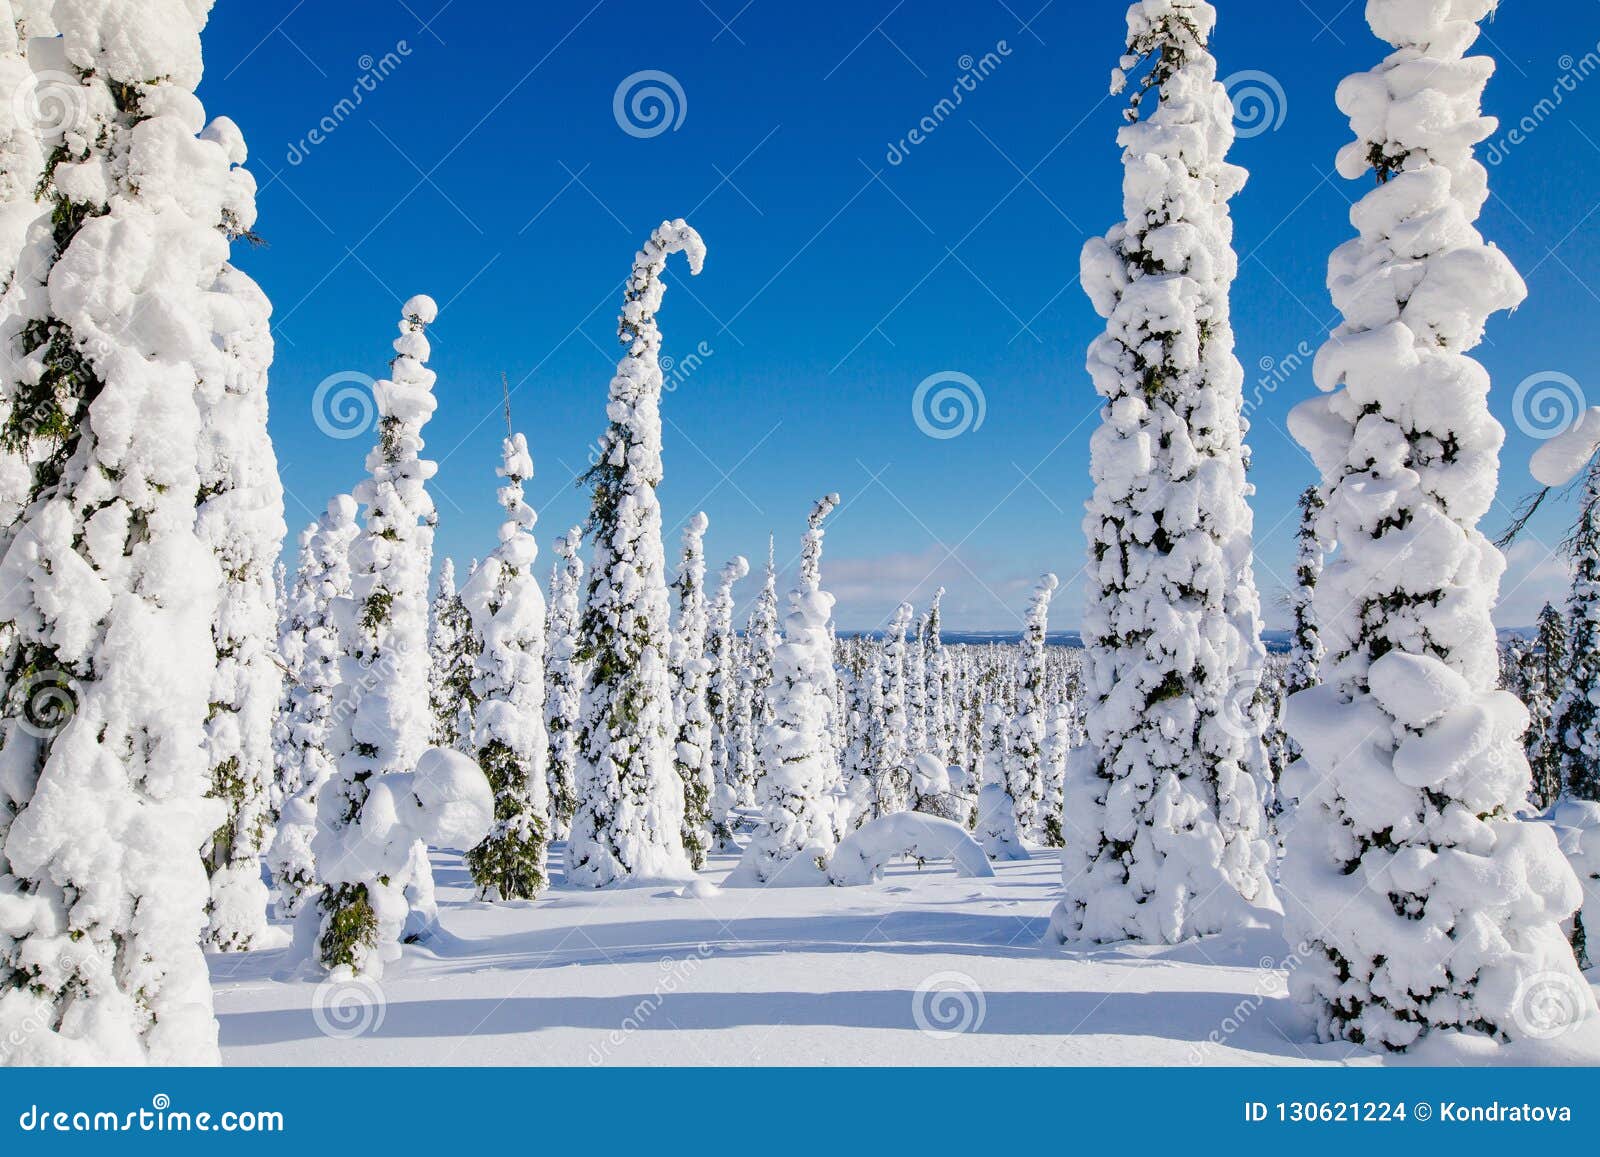 beautiful winter landscape with snowy trees in lapland, finland. frozen forest in winter.